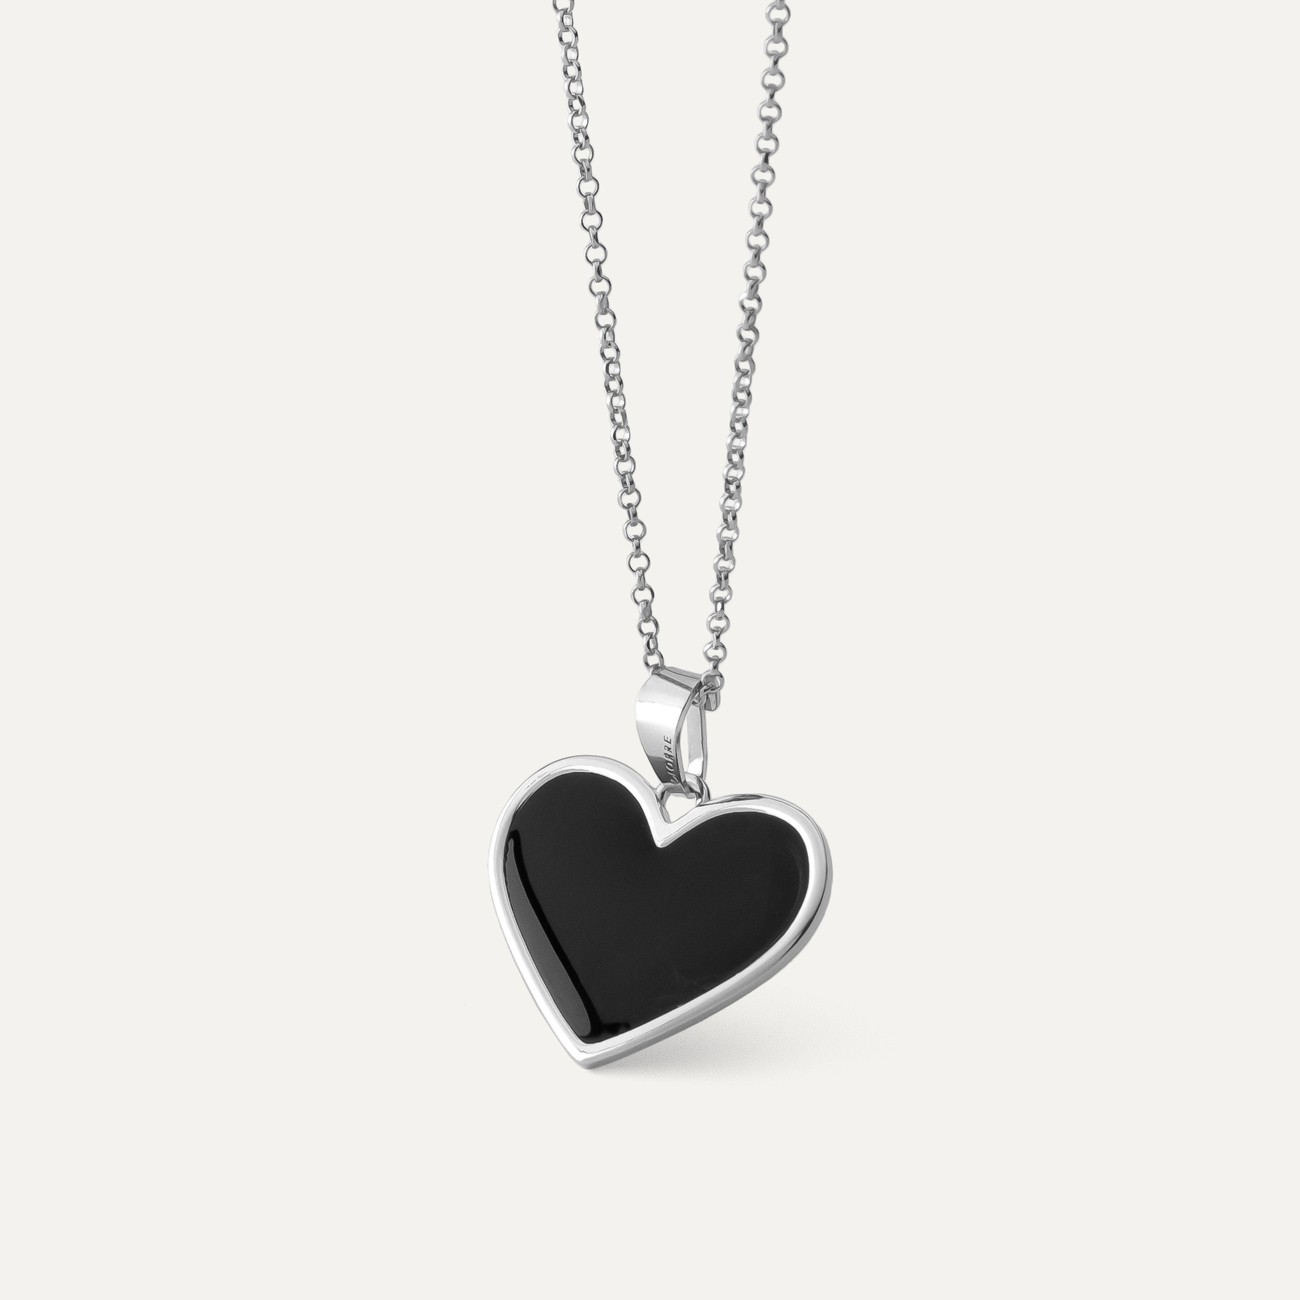 Make a Bold Statement with THE HUNT NYC's Onyx Sword Pierced Heart Necklace  — THE HUNT NYC